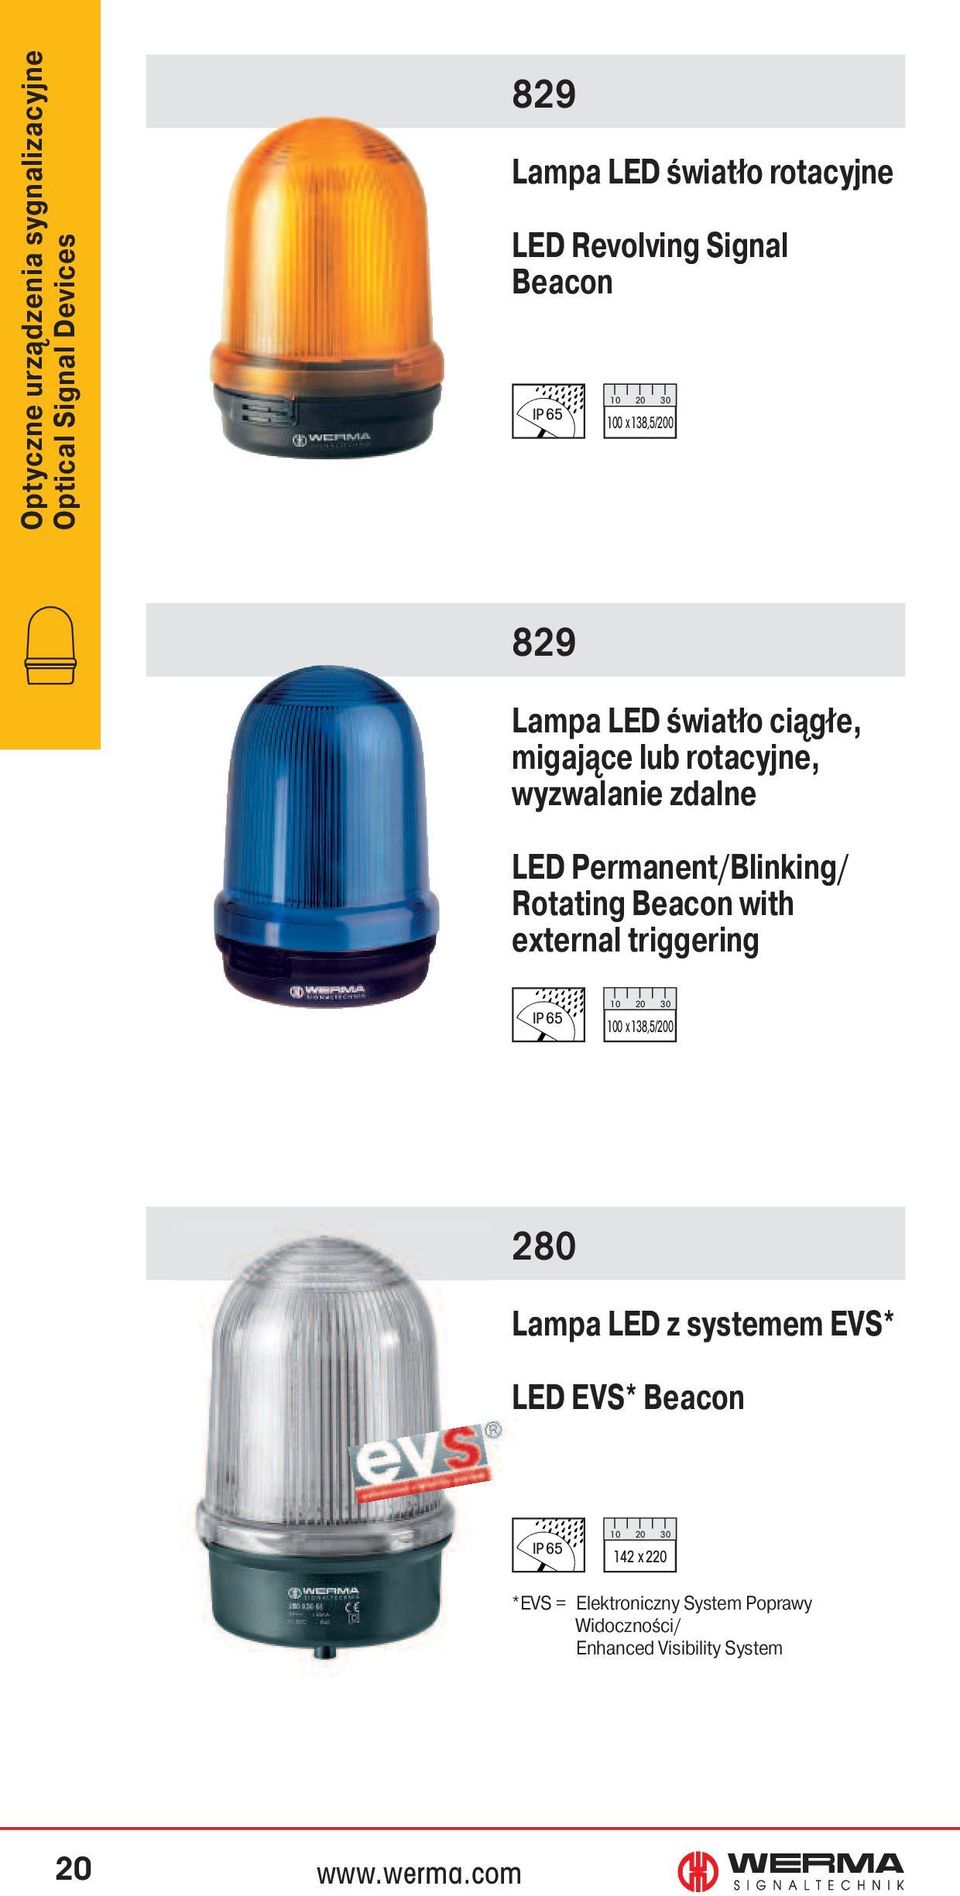 Permanent/Blinking/ Rotating Beacon with external triggering 100 x 138,5/200 280 Lampa LED z systemem